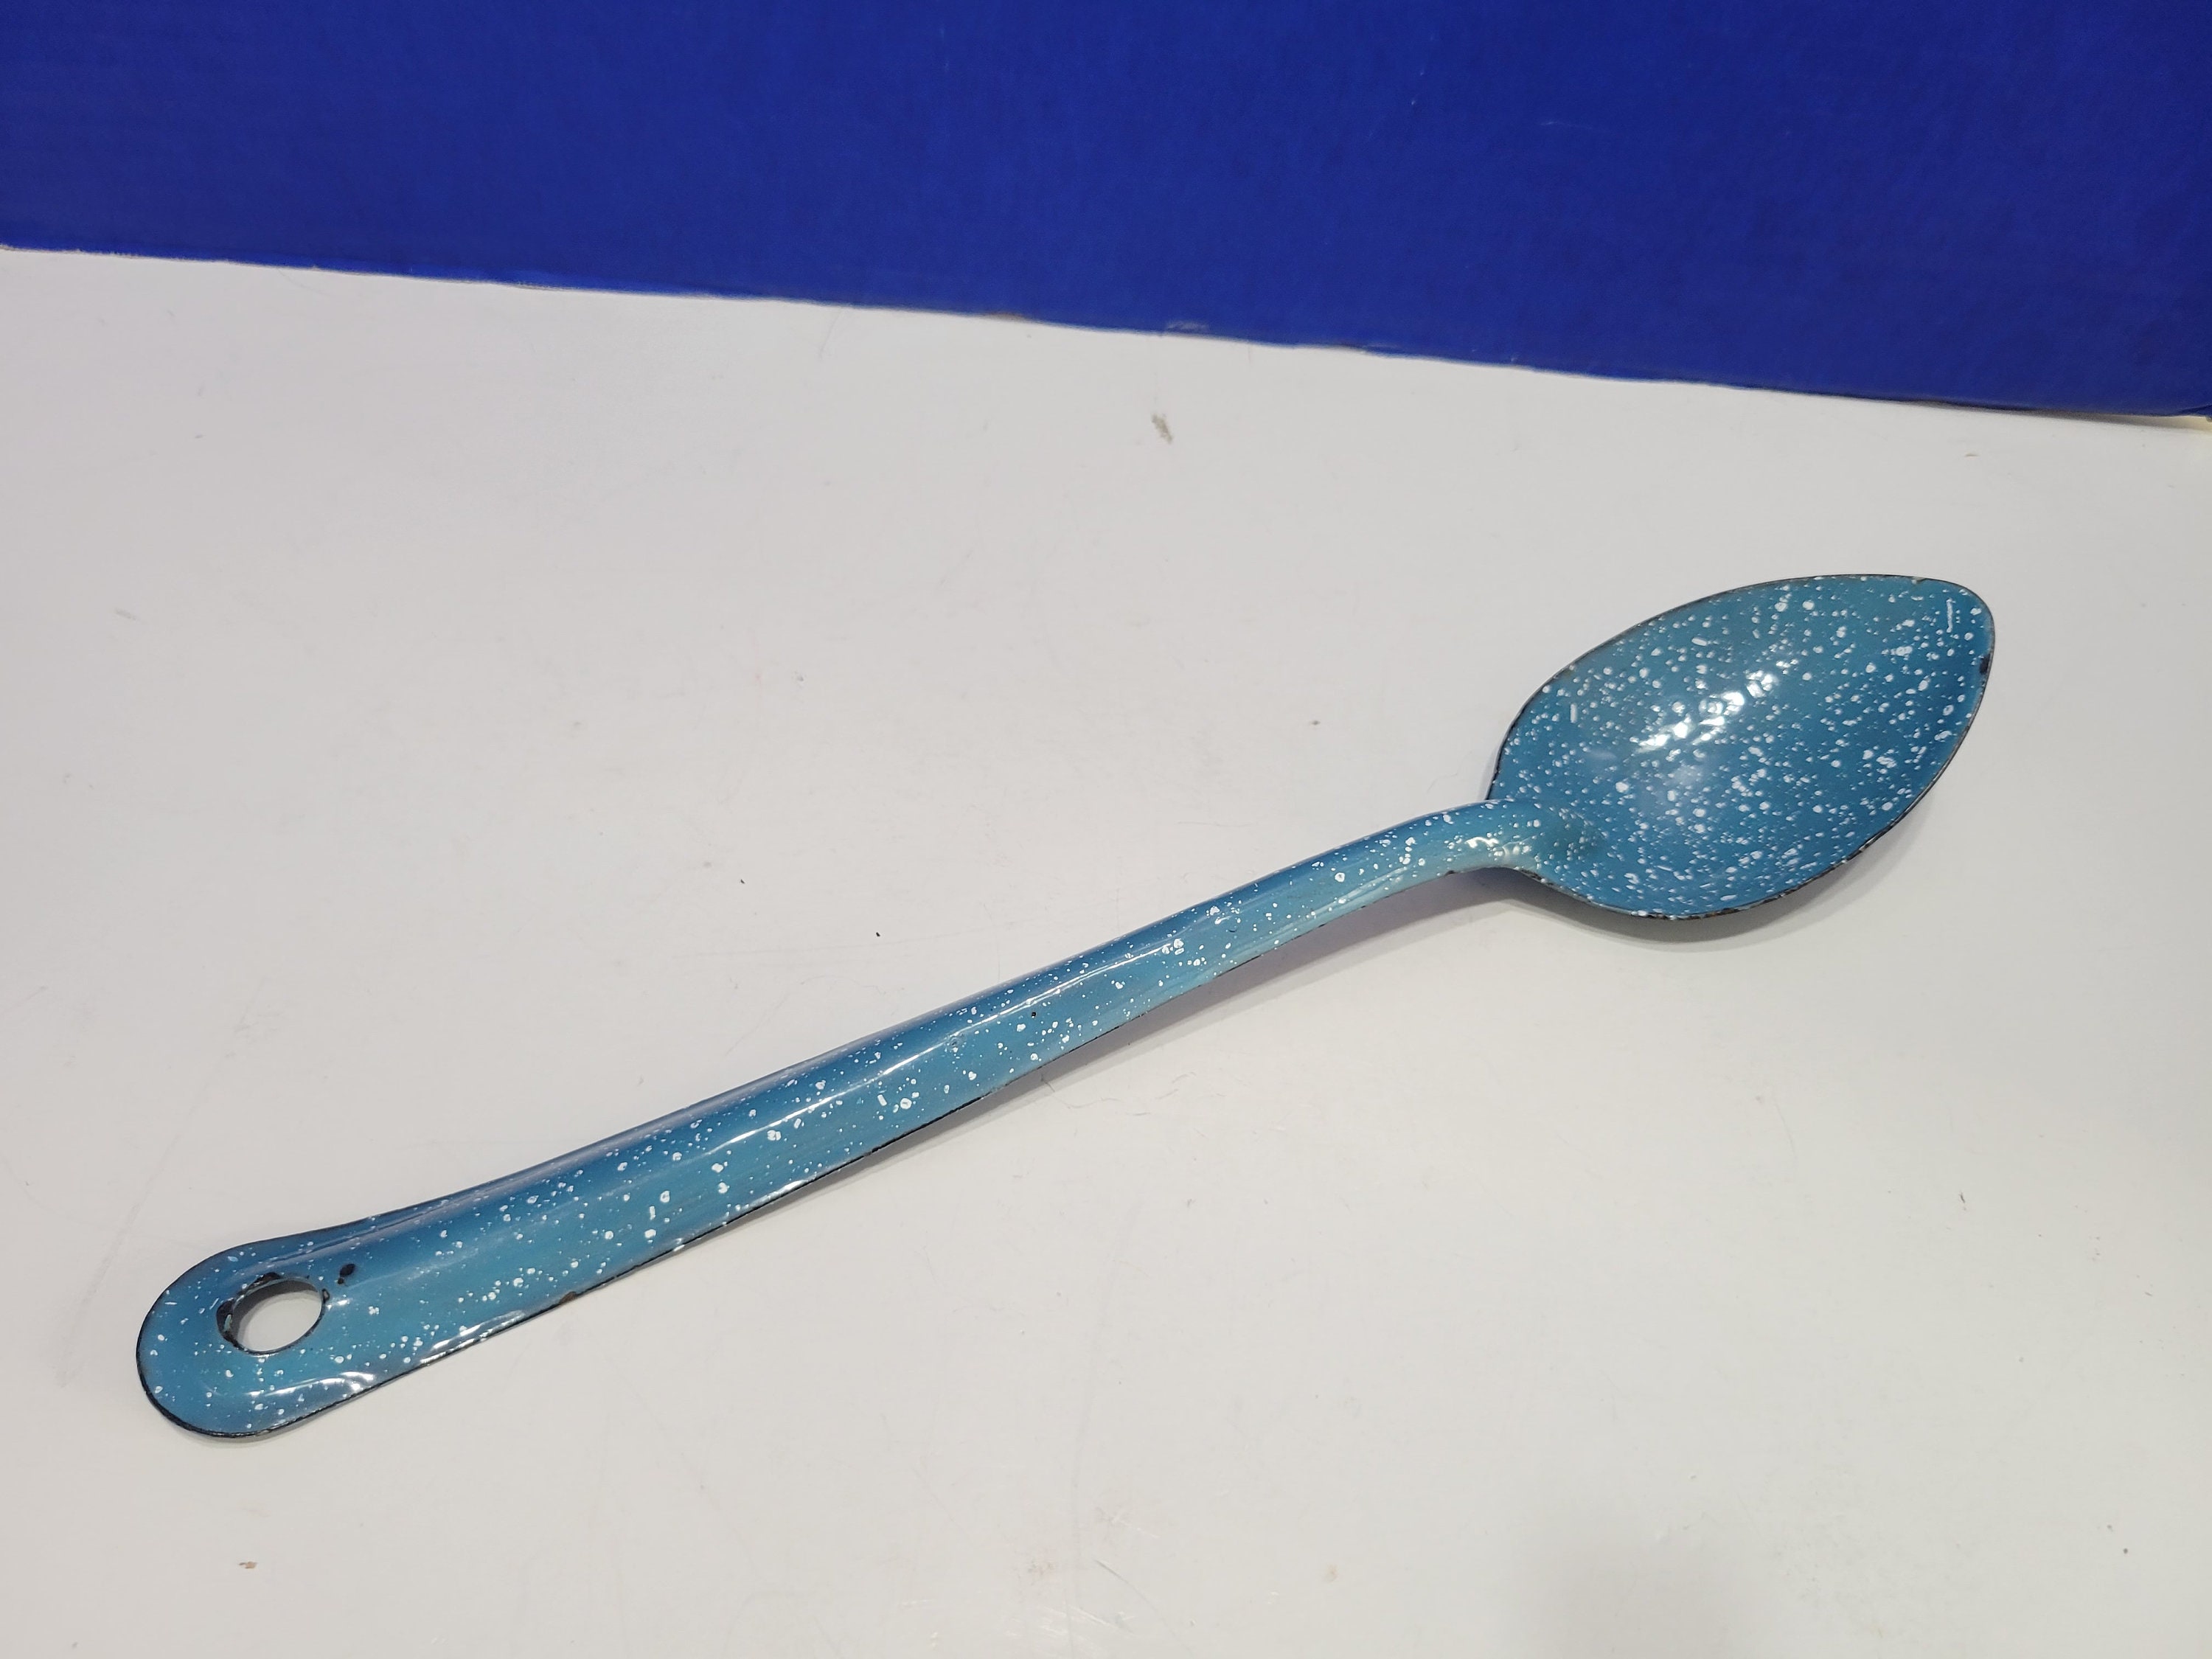 Product Review: Clover Tassel Maker - A Spoonful of Sugar